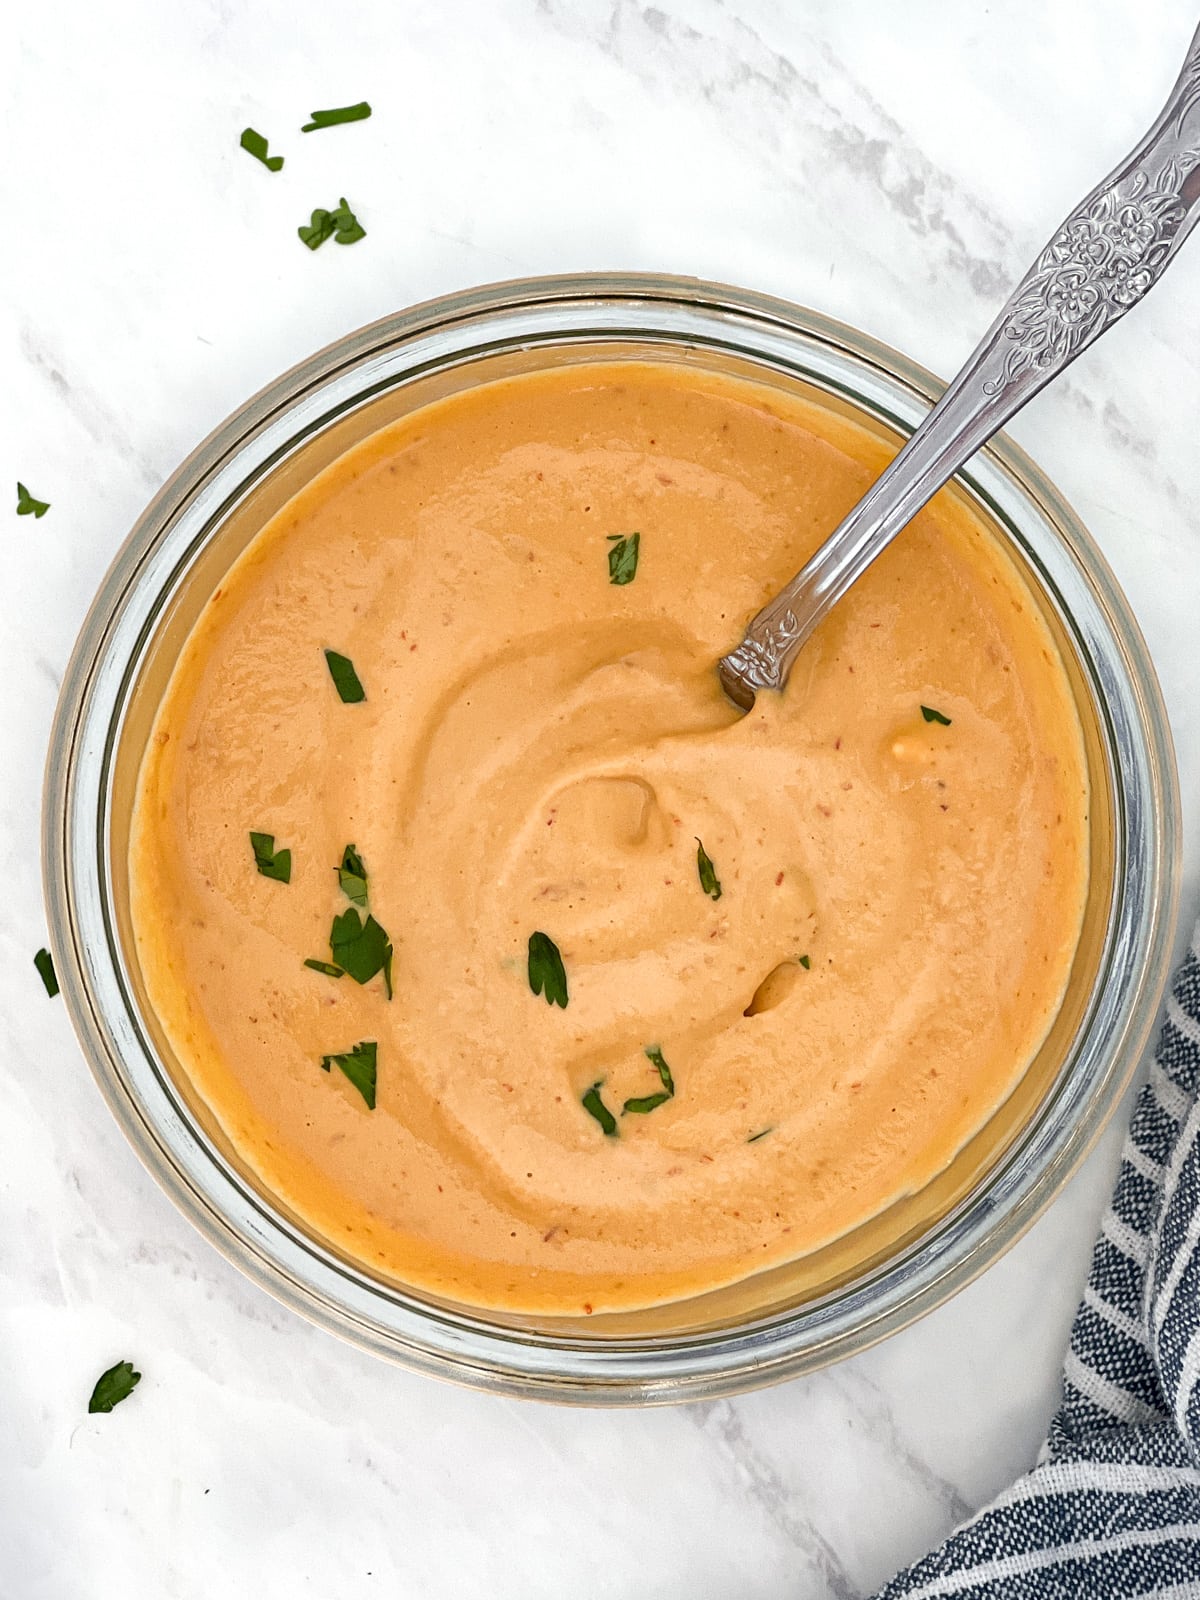 Bowl of chipotle cashew sauce with serving spoon.